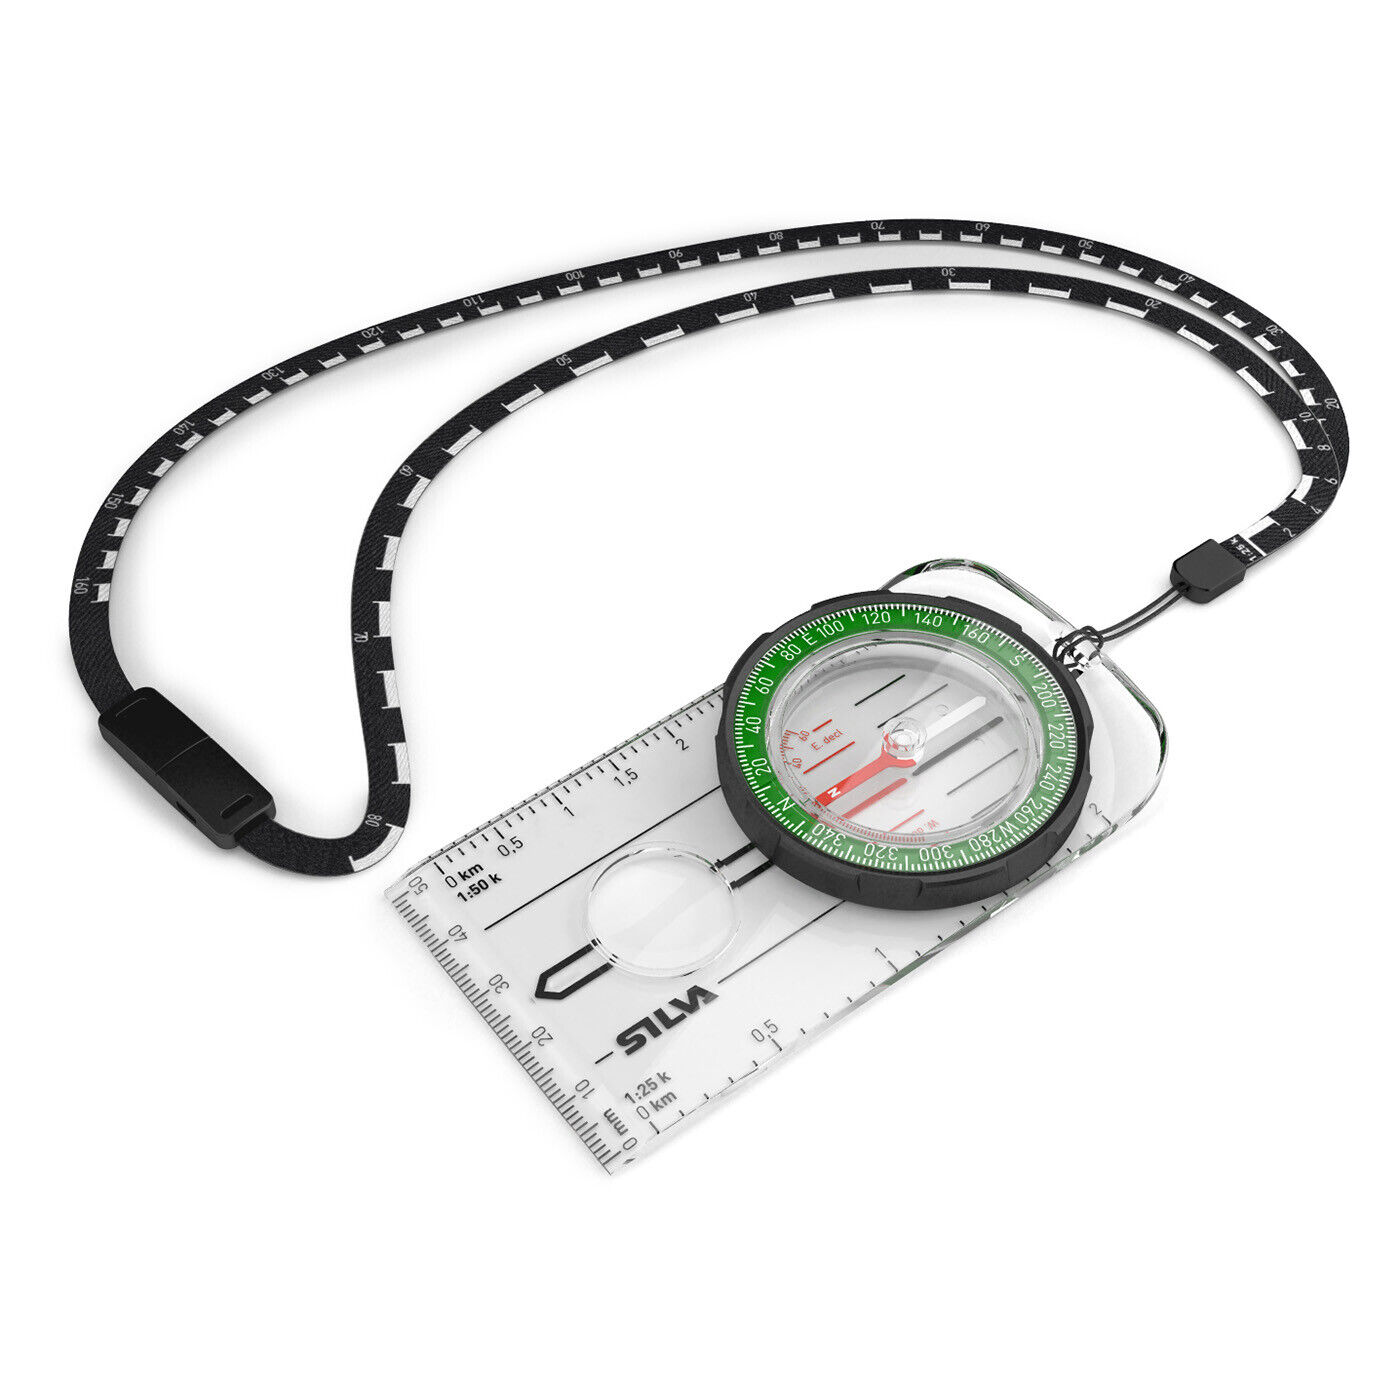 Authozied Silva New Improved Sweden Ranking TOP20 Compass Large-scale sale 37465 Ranger EXP -